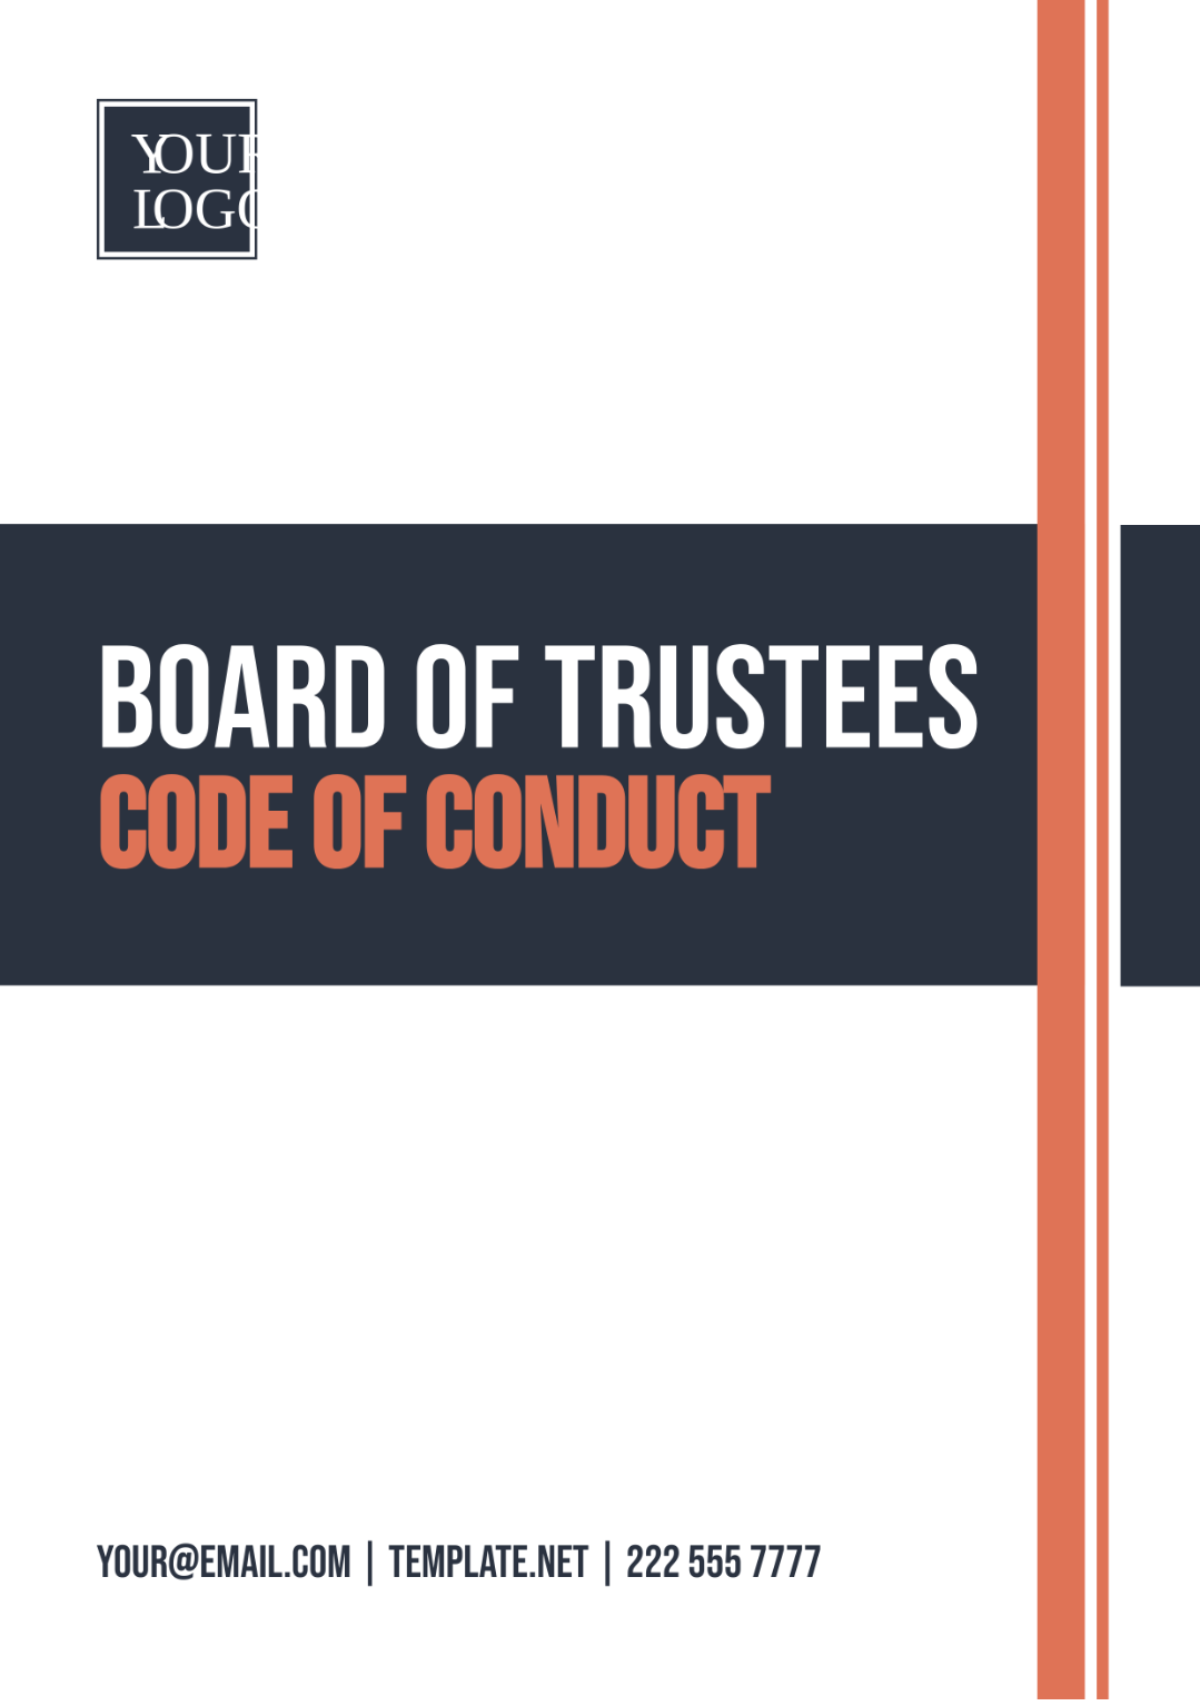 Board of Trustees Code of Conduct Template